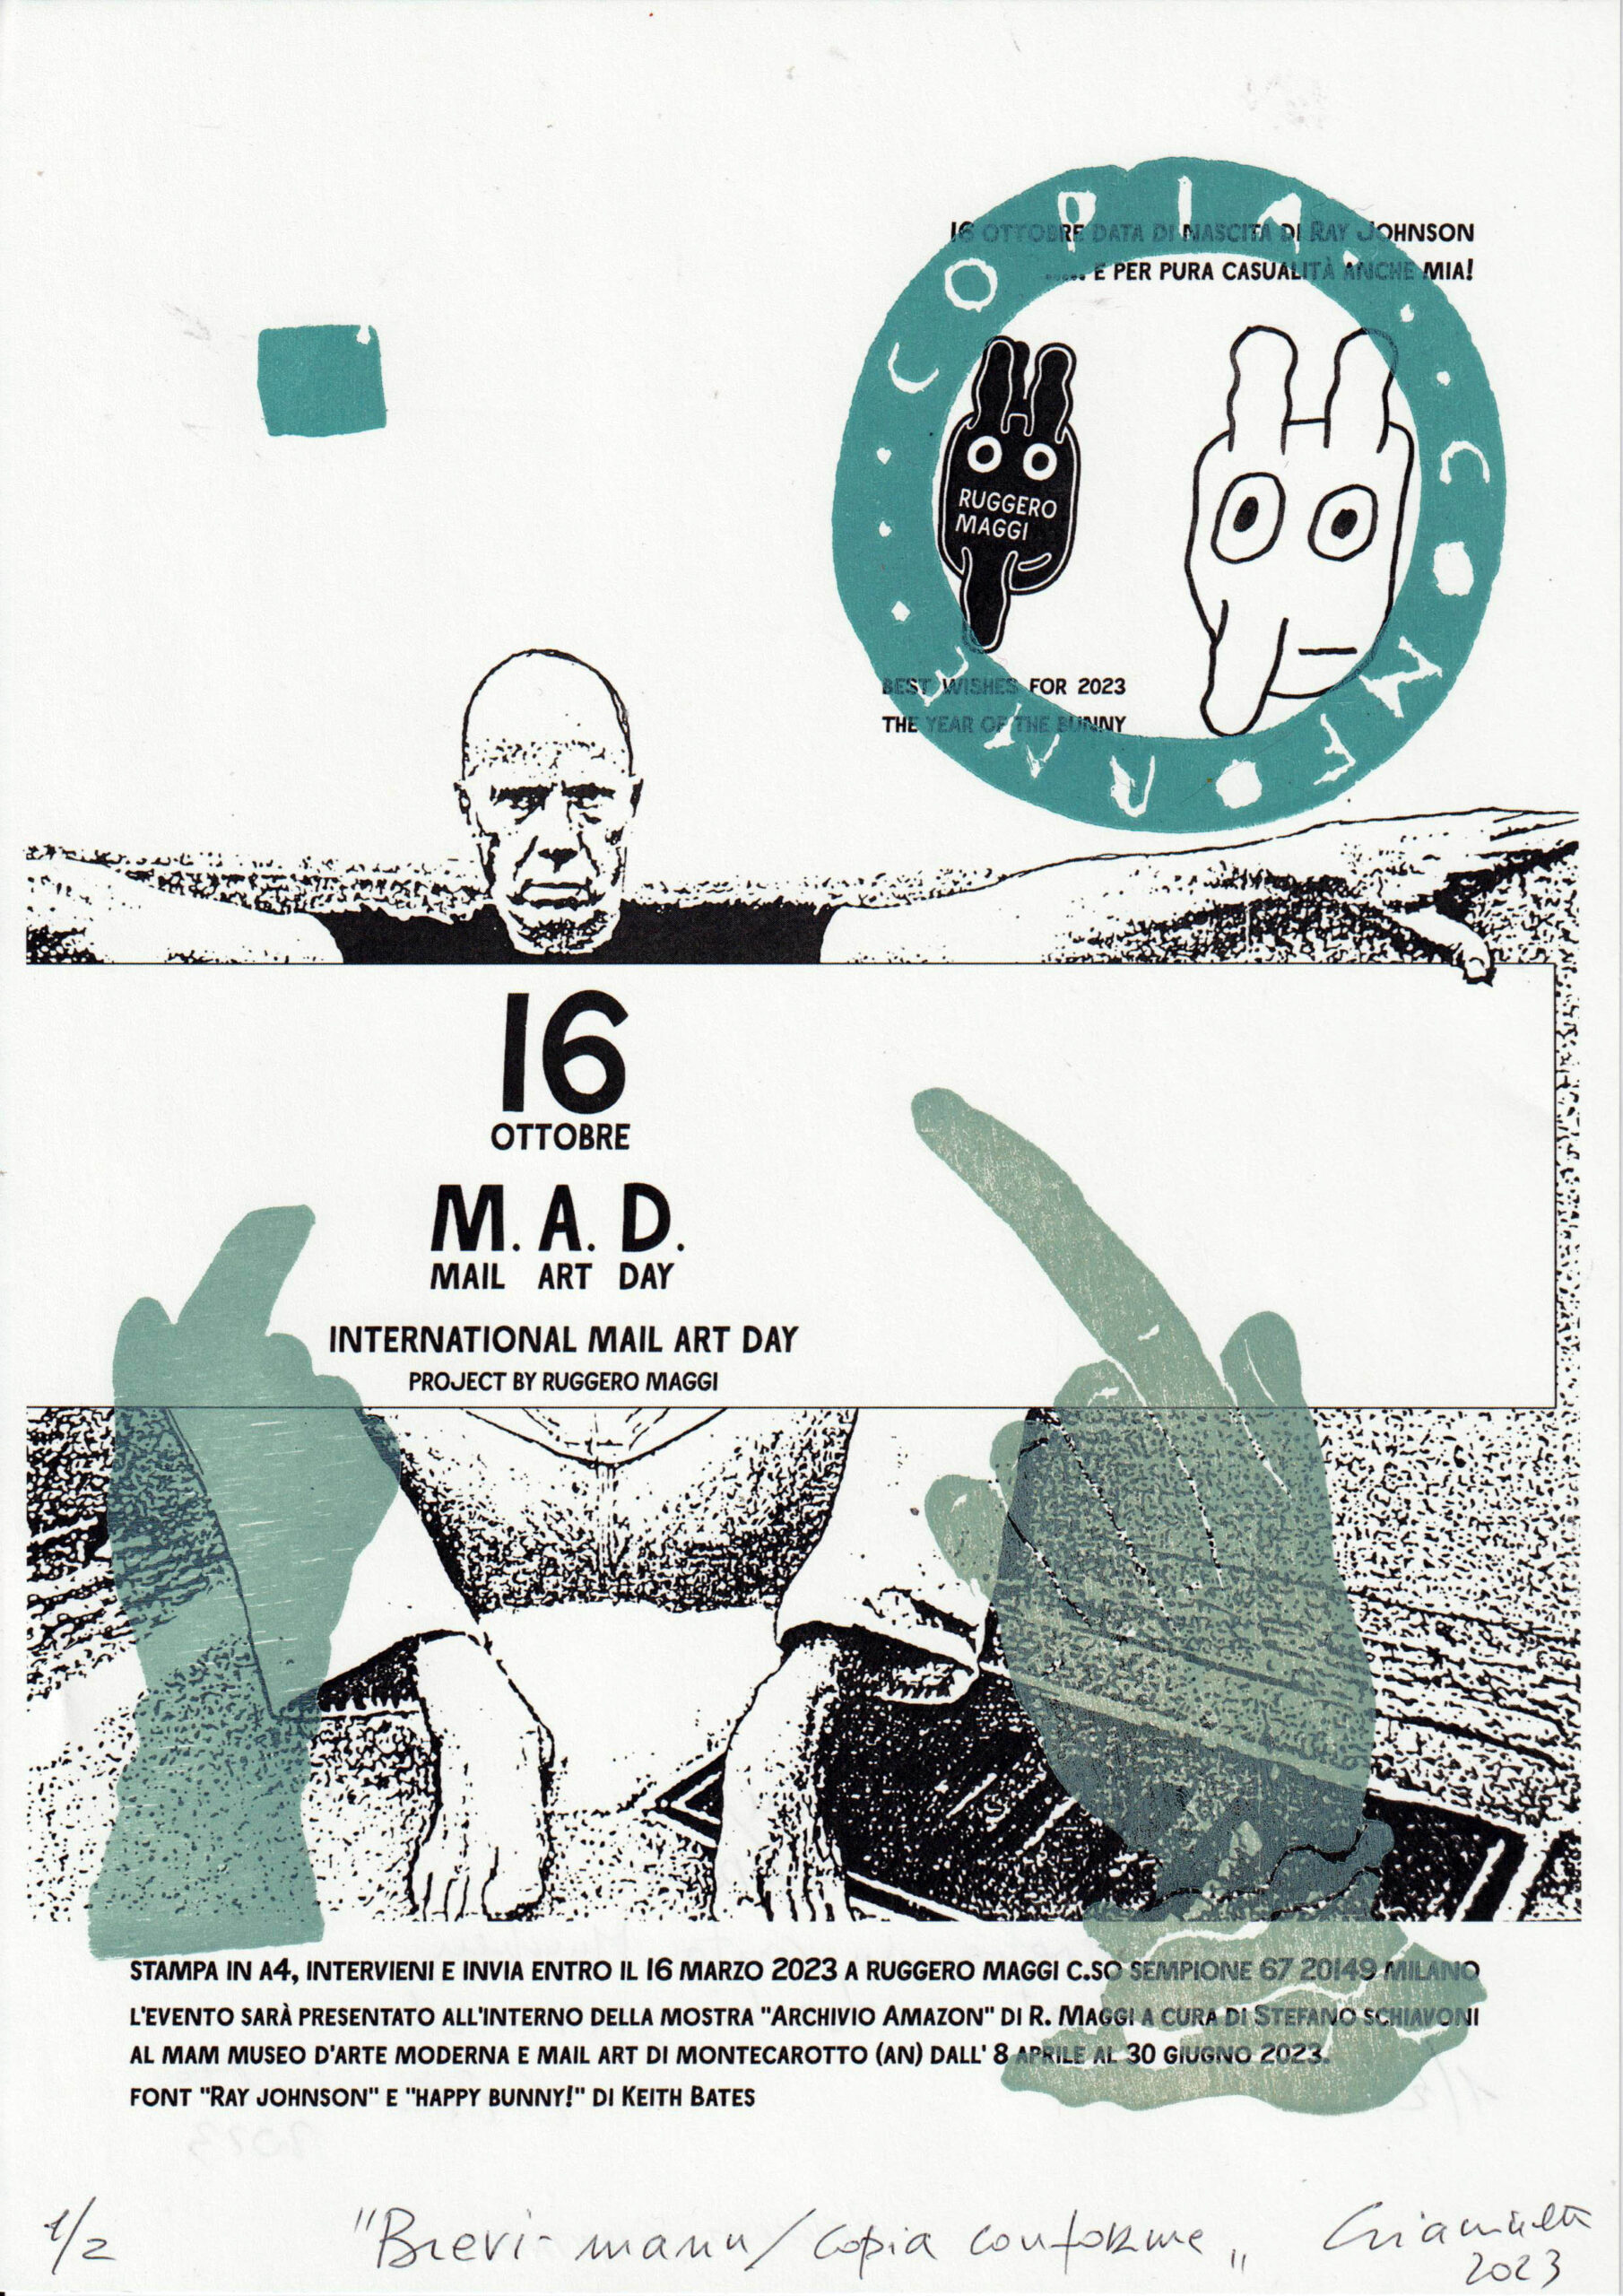 M.A.D. - Mail Art Day: Roberto Gianinetti, Italy